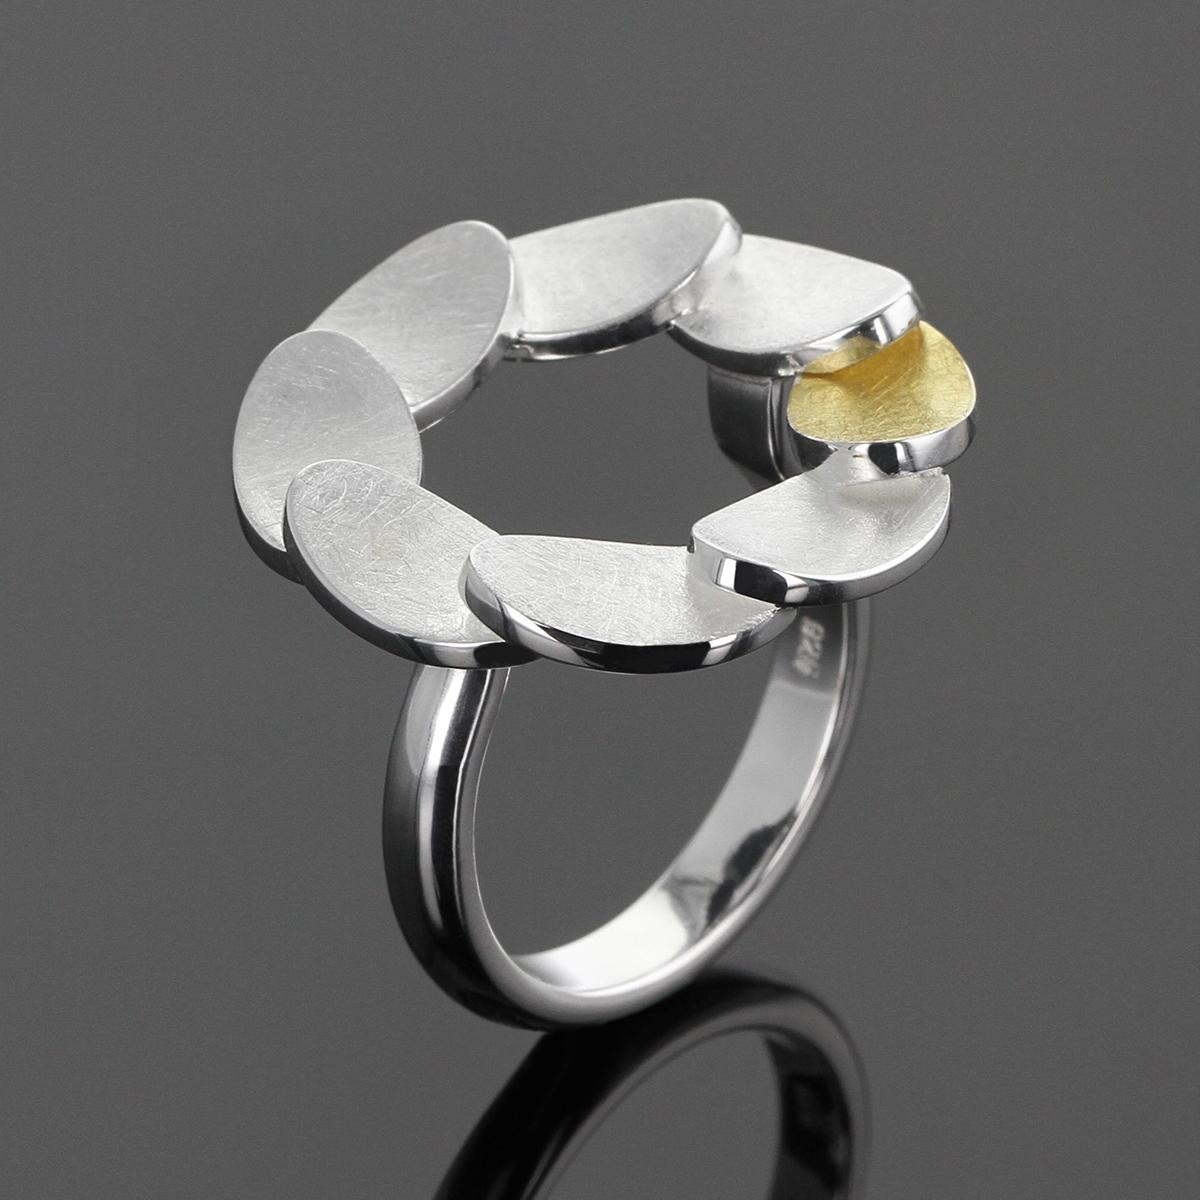 Sterling silver rings made in Mauritius